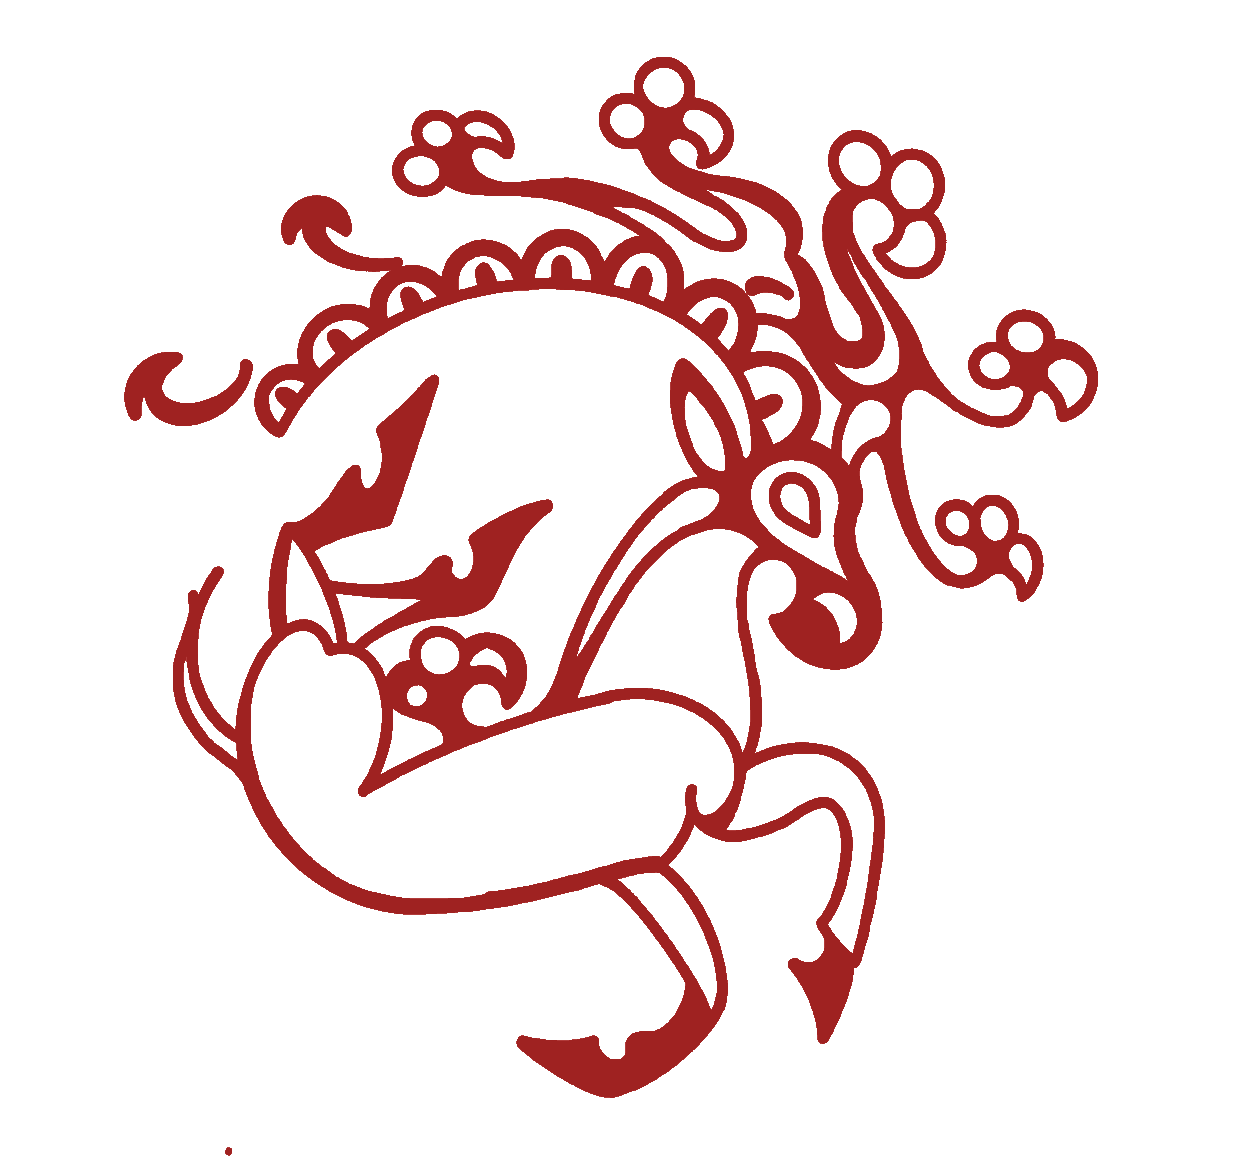 A red dragon is shown on the black background.